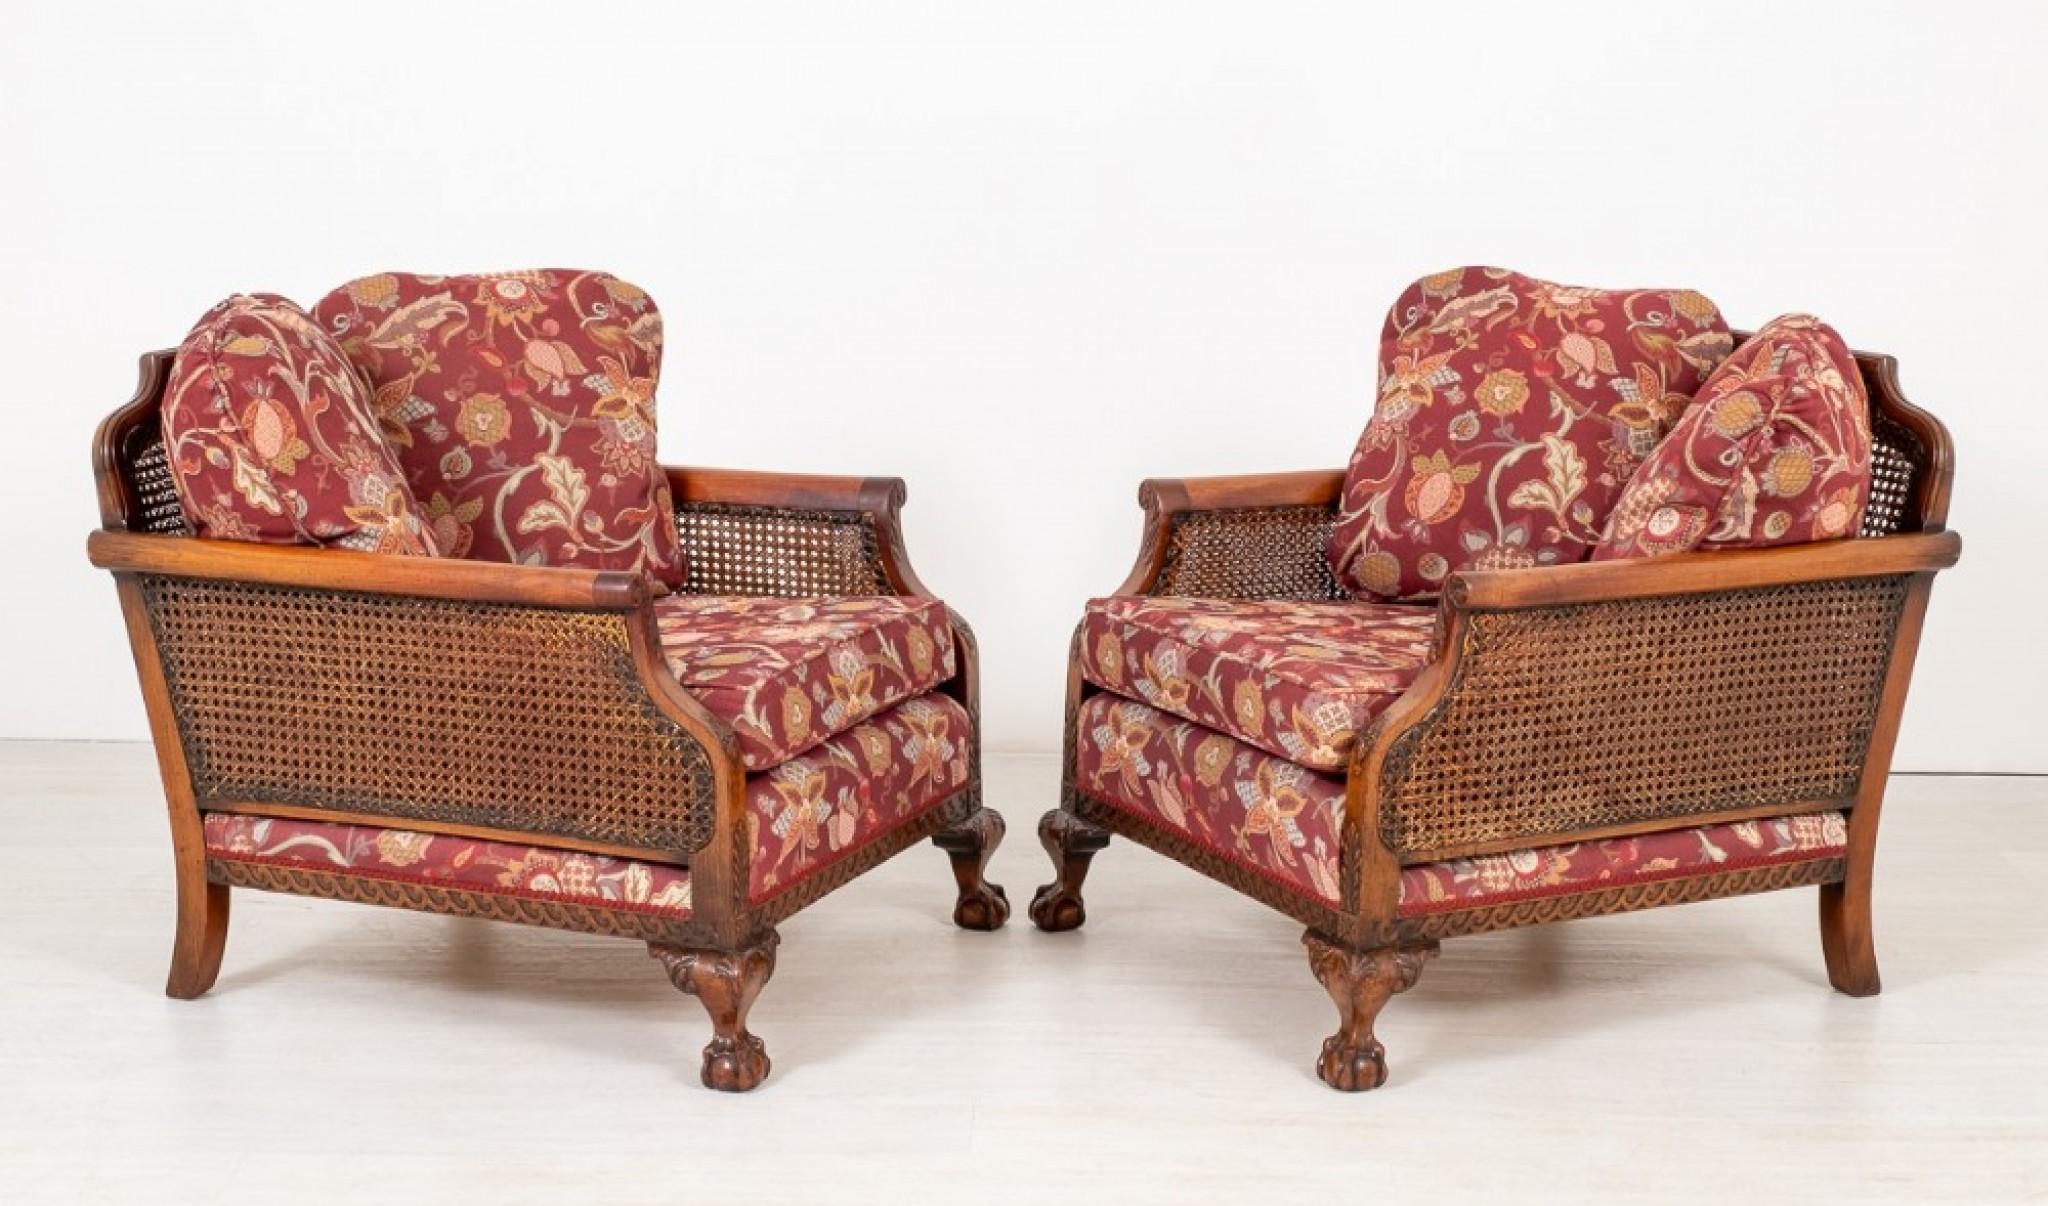 Good quality mahogany bergere suite.
This bergere suite consists of 2 x club chairs and 1 x 3 seater settee.
circa 1920
All pieces stand upon boldly carved ball and claw feet with a carved knee and blind fret work rails.
The cane work is in good